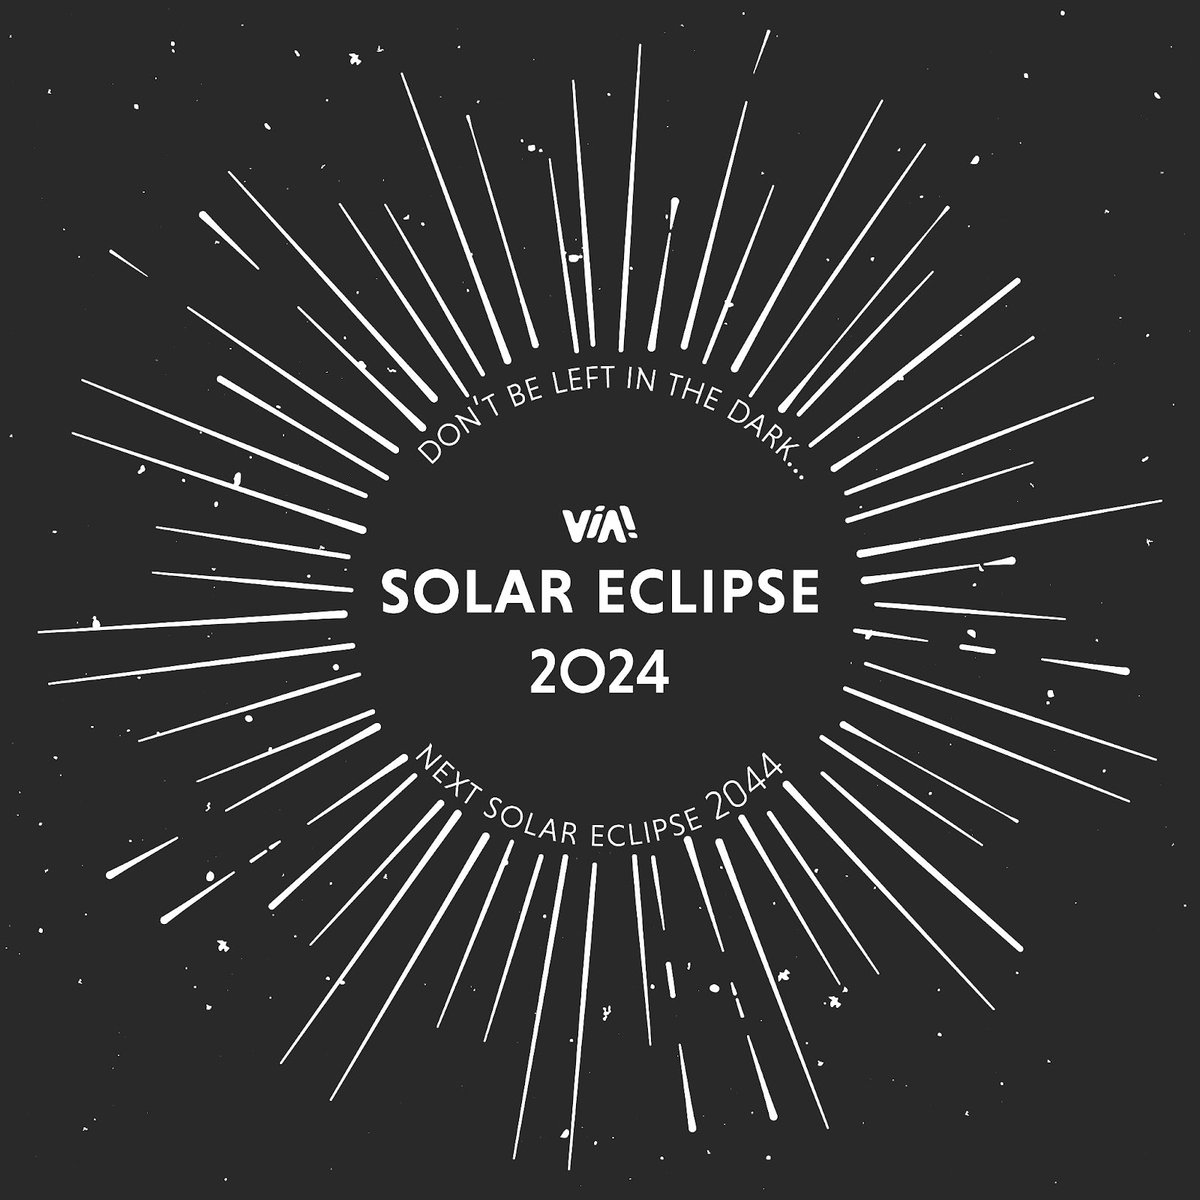 🌞Nature's awe-inspiring phenomenon, a #solareclipse, will appear on April 8, 2024. During the #eclipse, the Moon will perfectly align with the Sun making the Sun appear to be engulfed by darkness. Don’t miss it - the next one won’t be until August 23, 2044! 🌒 #Eclipse2024